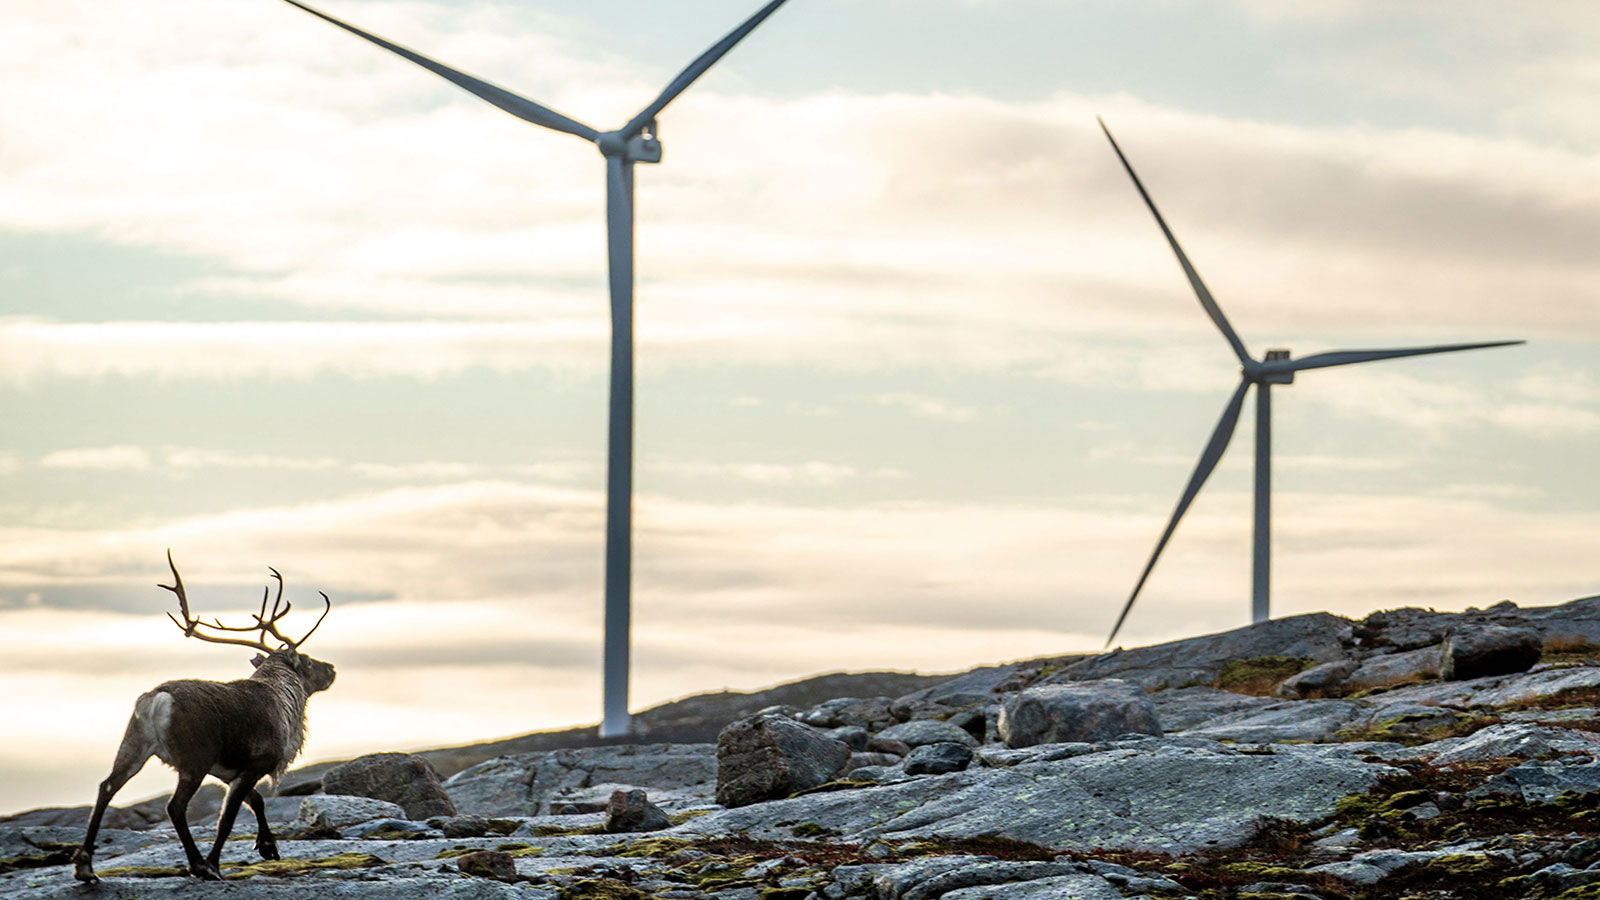 A reindeer walks up a rocky hill with two wind turbines close in the background